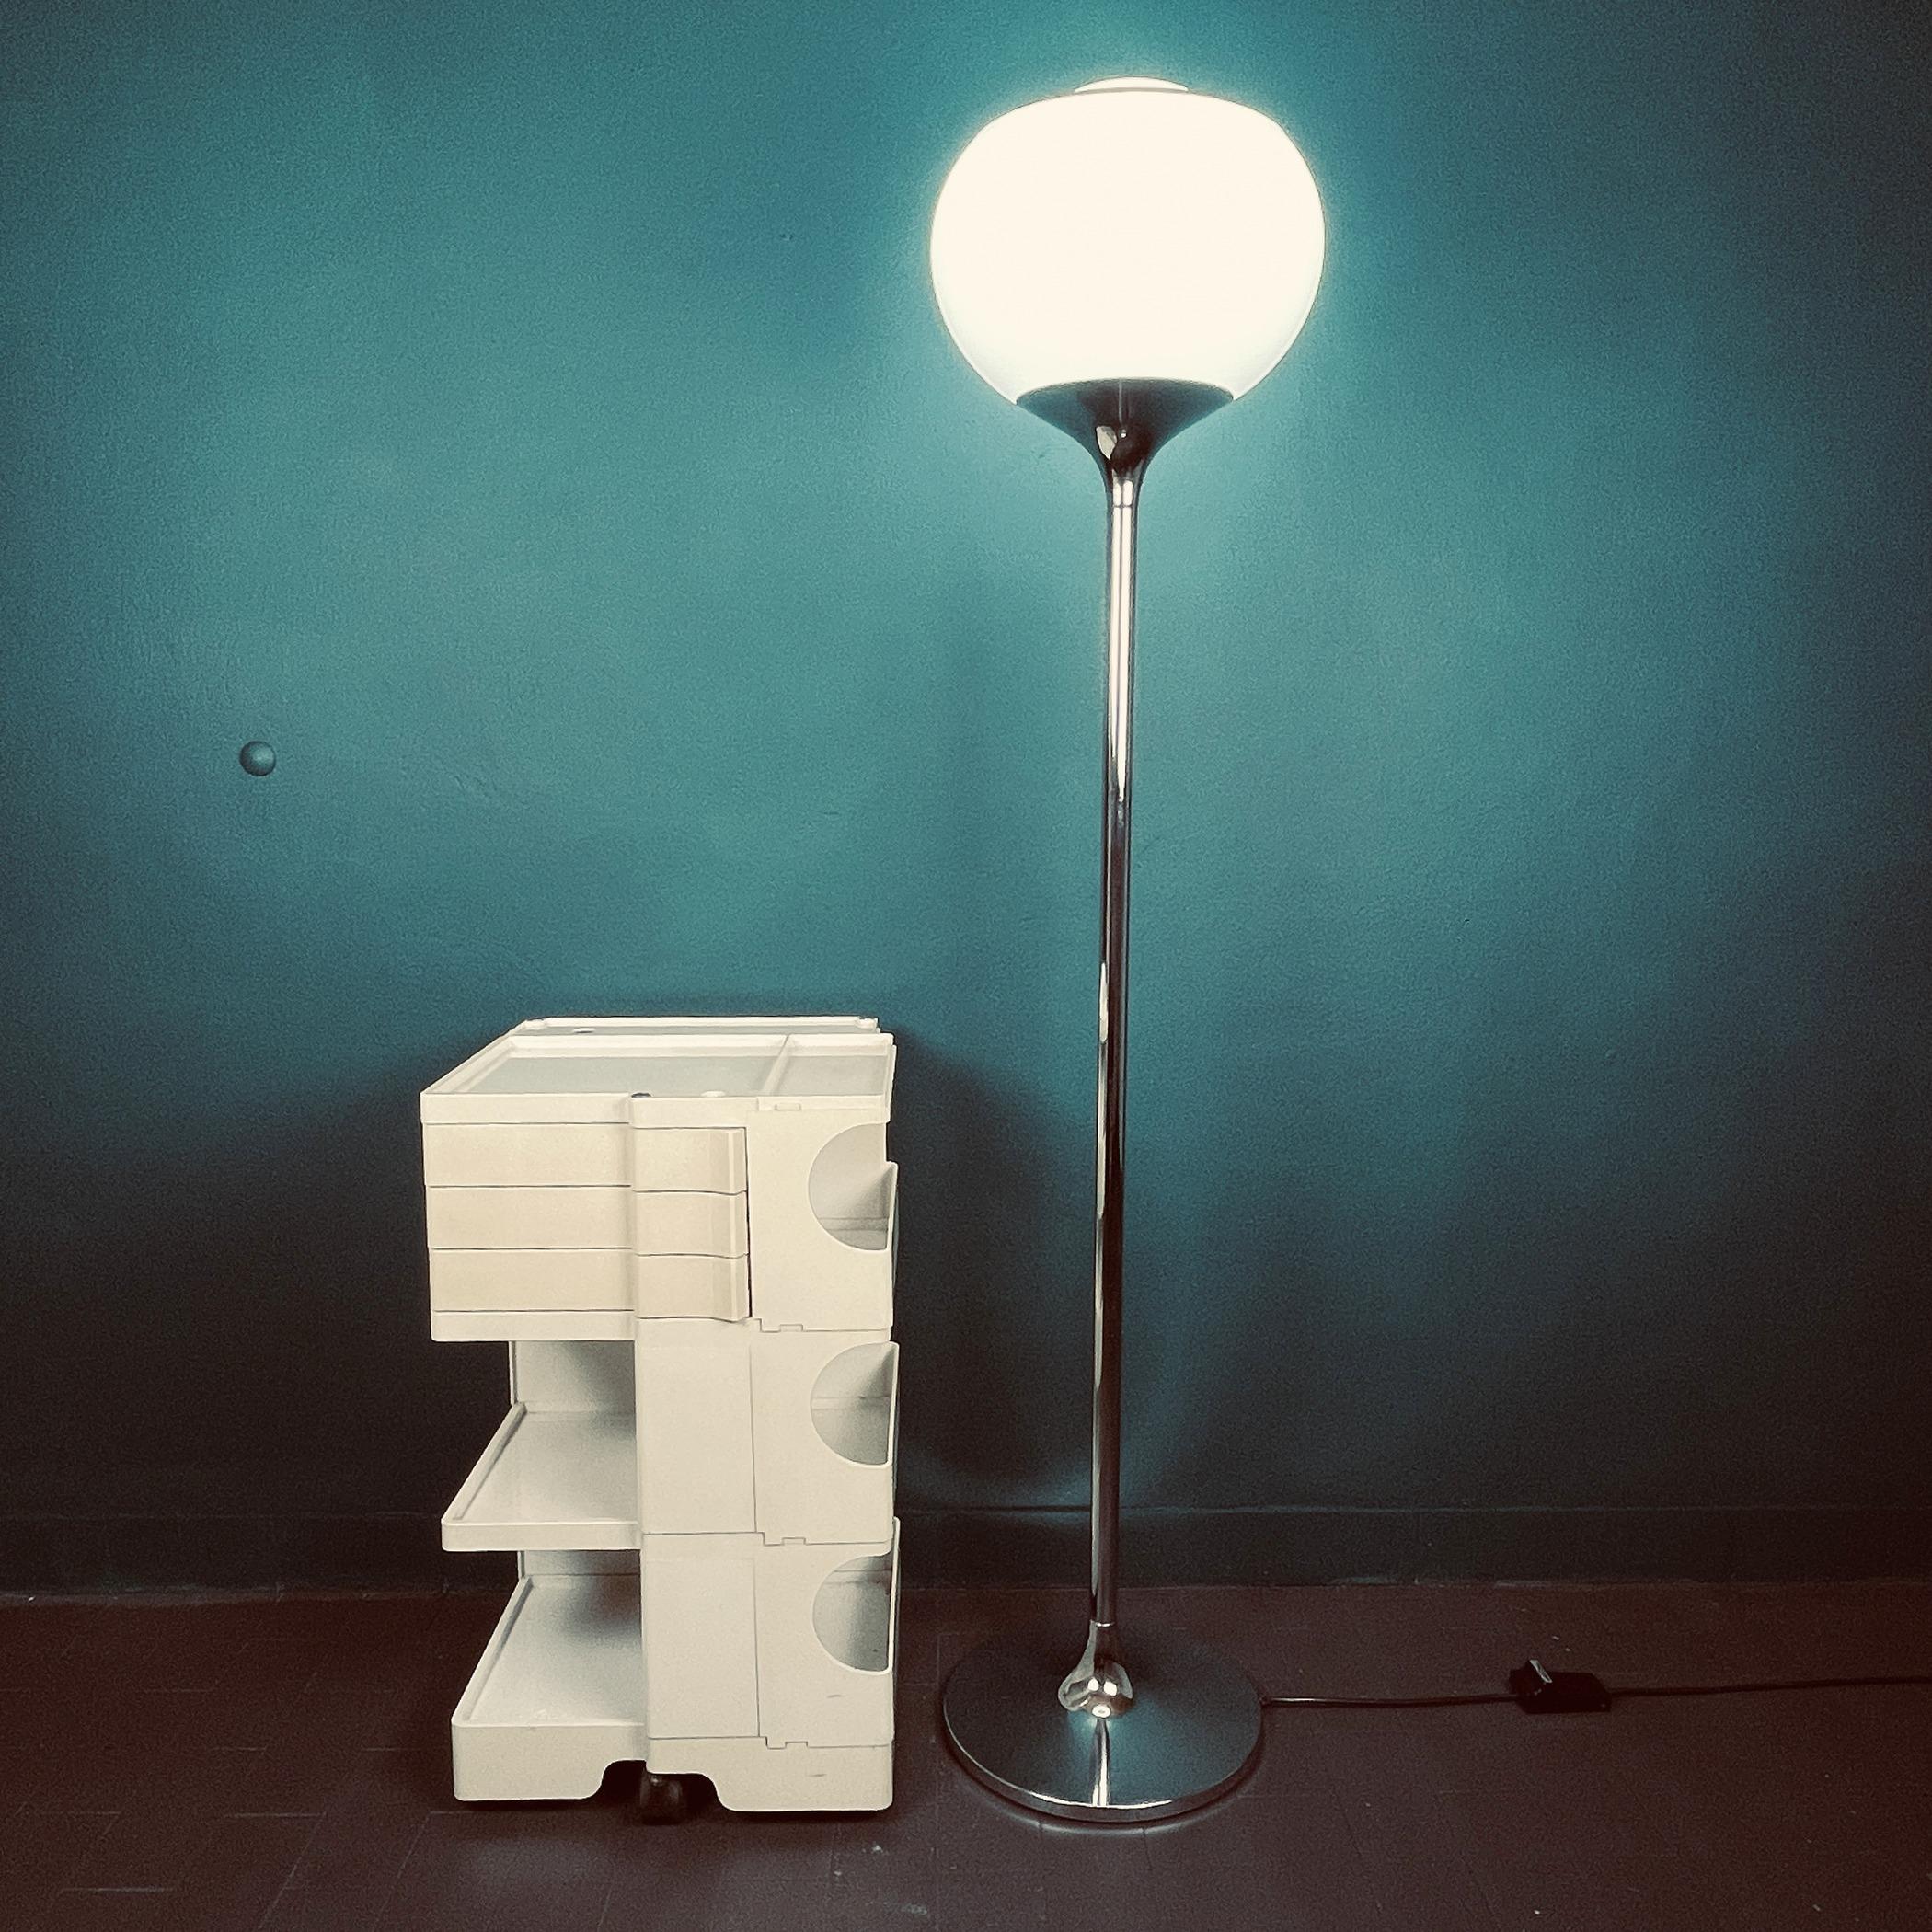 A fabulous floor lamp in glowing chrome and white-milk plastic. This chrome-plated standard floor lamp was designed by Harvey Guzzini for Meblo in the 1960s and casts a typical Guzzini glow of softly diffused light. This ‘Bud’ floor lamp was